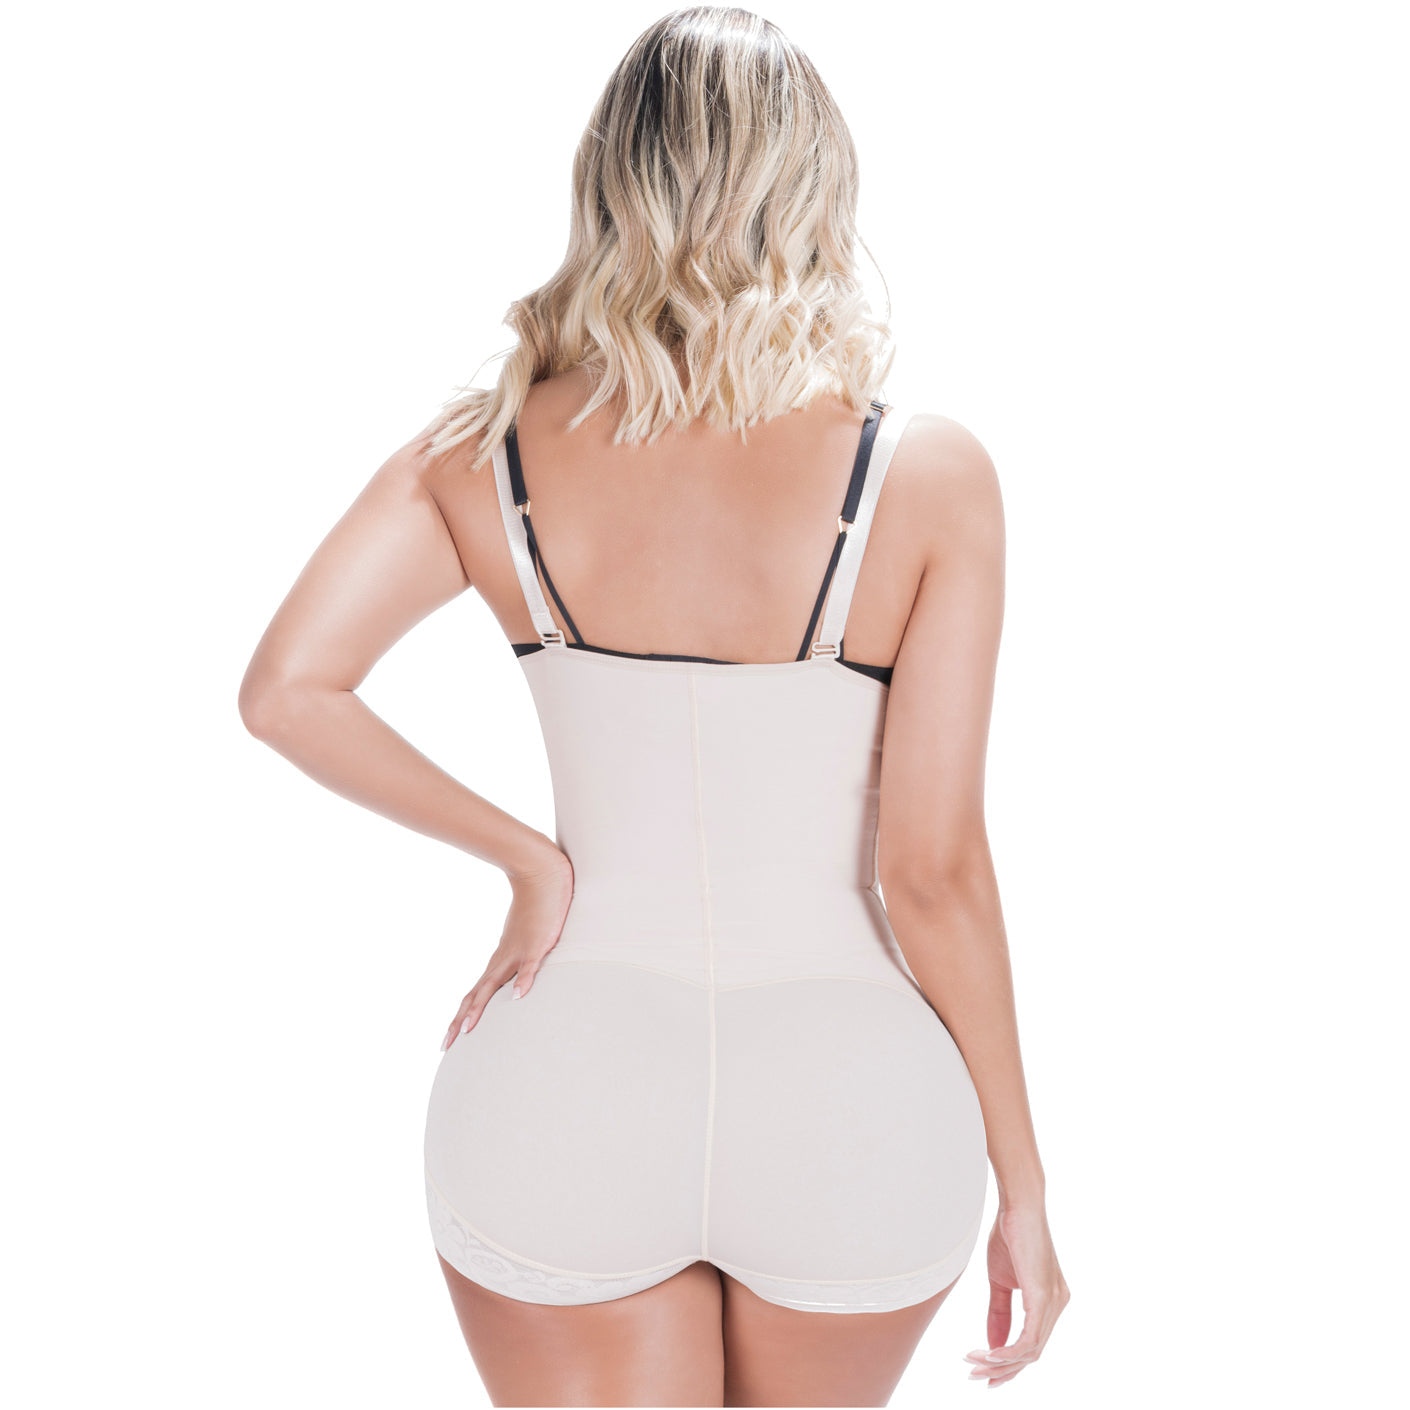  Sonryse O24ZL Fajas Colombianas Reductoras y Moldeadoras  Compression Vest Shaper Tummy Tuck Shaper Girdle for Women Beige X-Small :  Clothing, Shoes & Jewelry